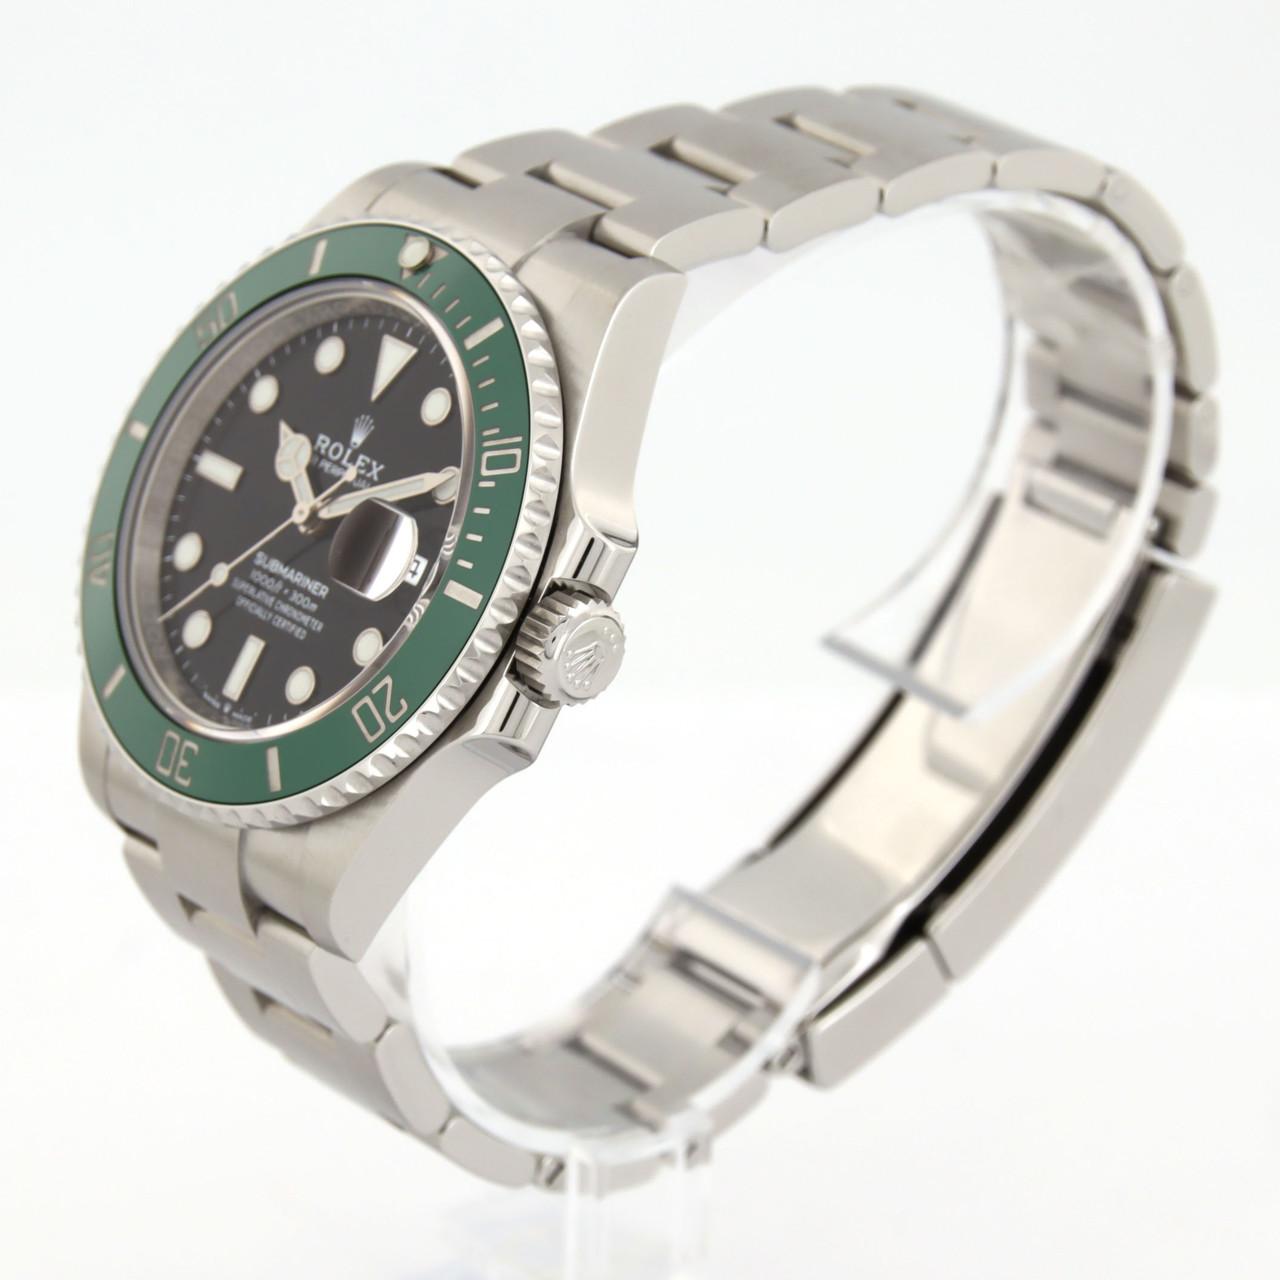 ROLEX Submariner Date 126610LV SS Automatic random number